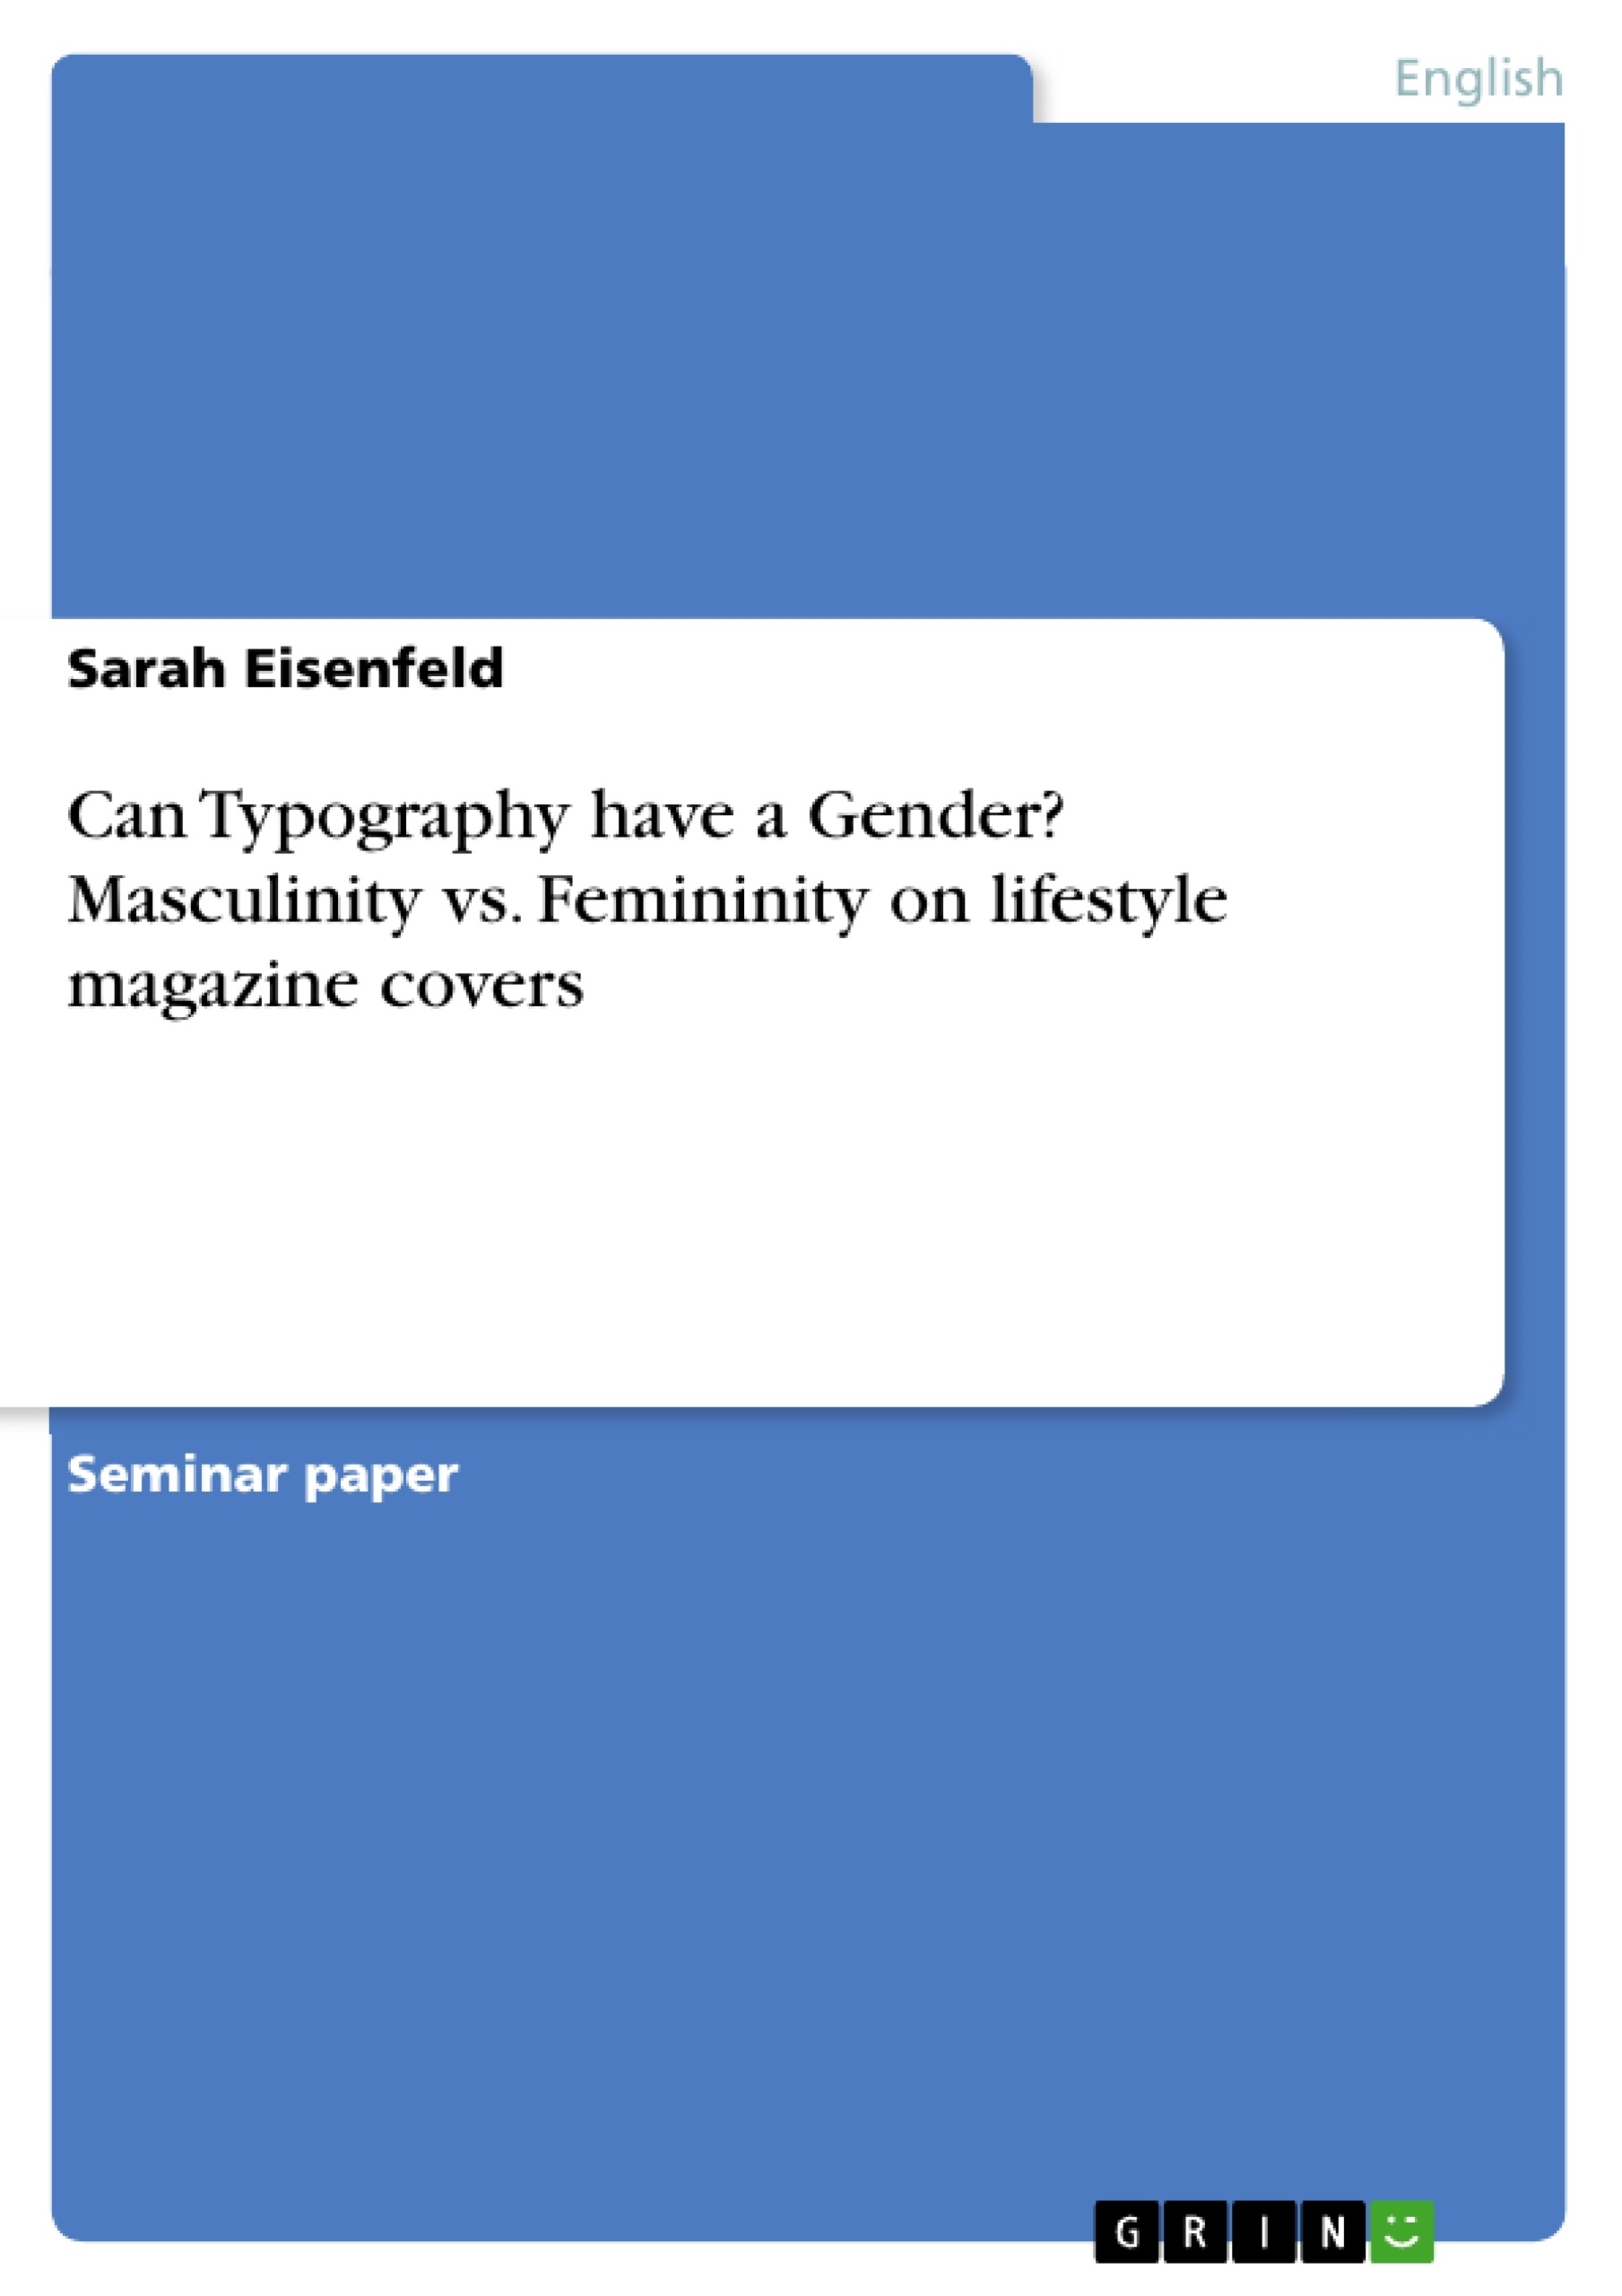 Titre: Can Typography have a Gender? Masculinity vs. Femininity on lifestyle magazine covers